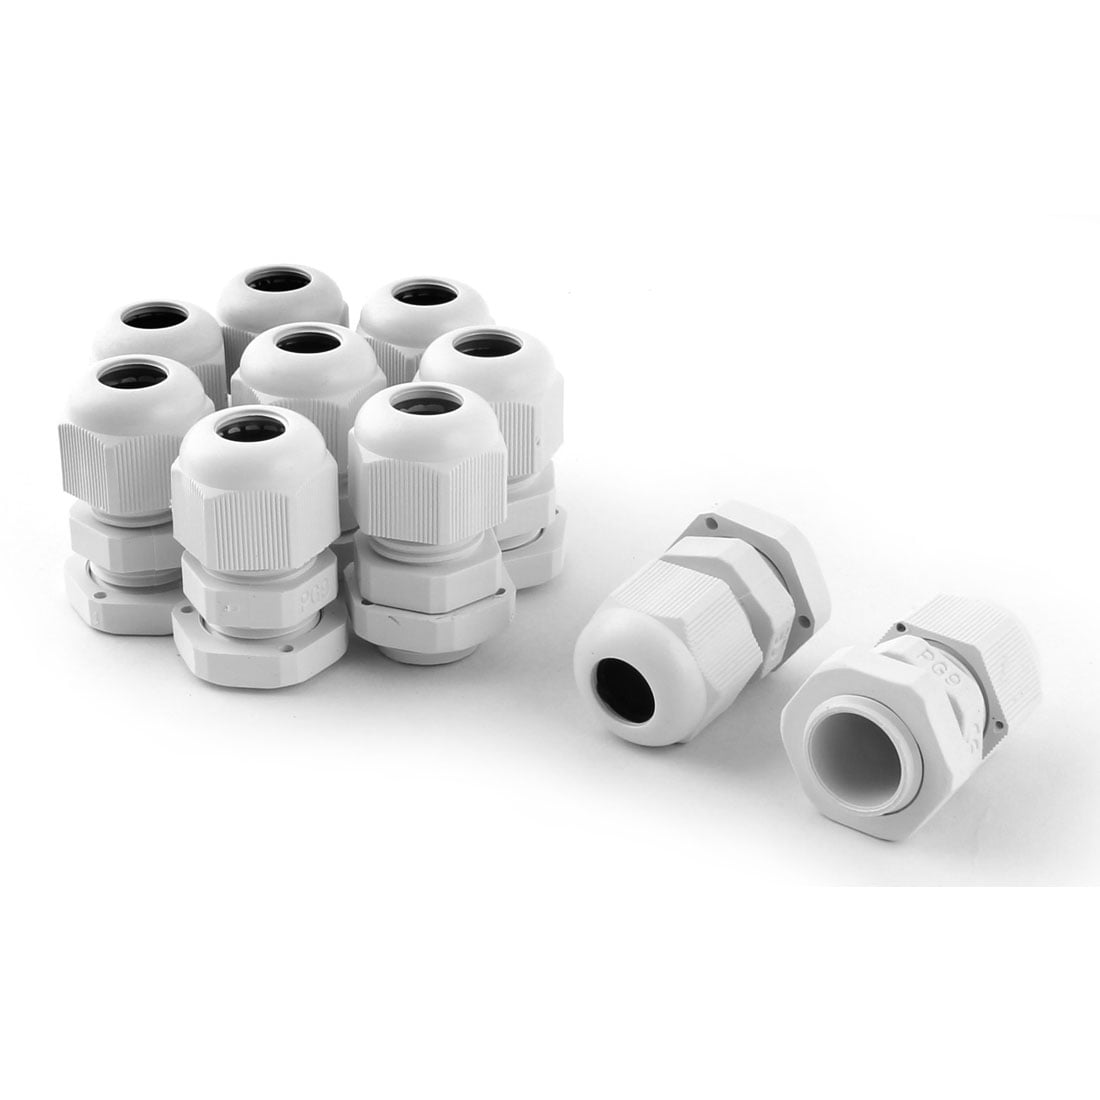 PG11 Strain Relief Cord Grip Cable Glands 8Pcs for 5-10mm Dia Cable 